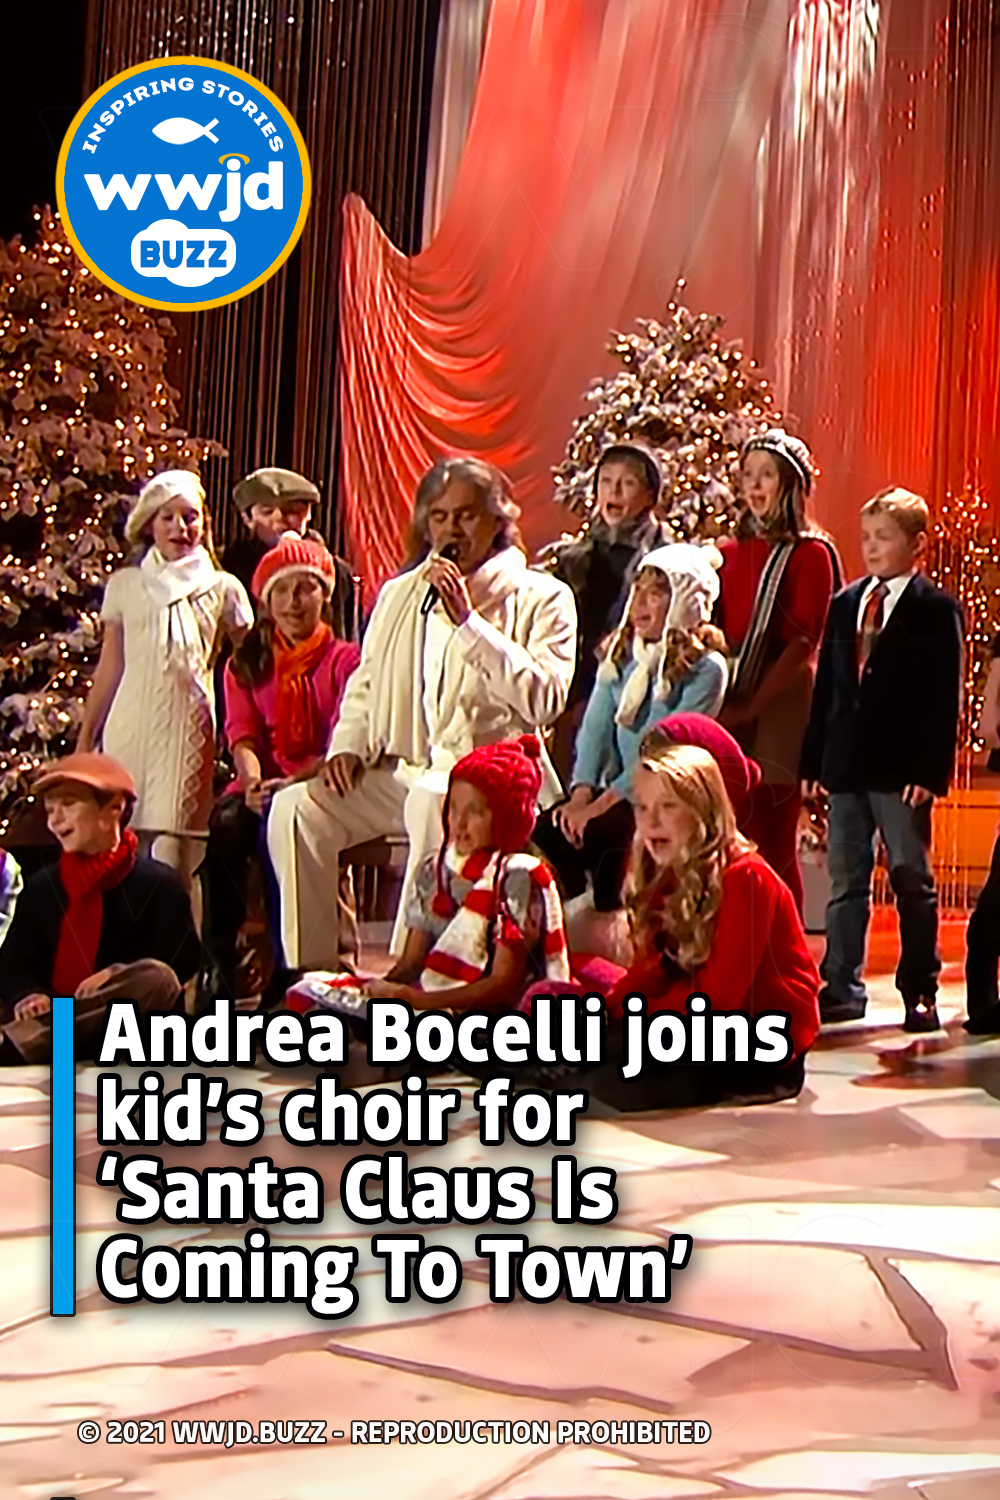 Andrea Bocelli joins kid’s choir for ‘Santa Claus Is Coming To Town’